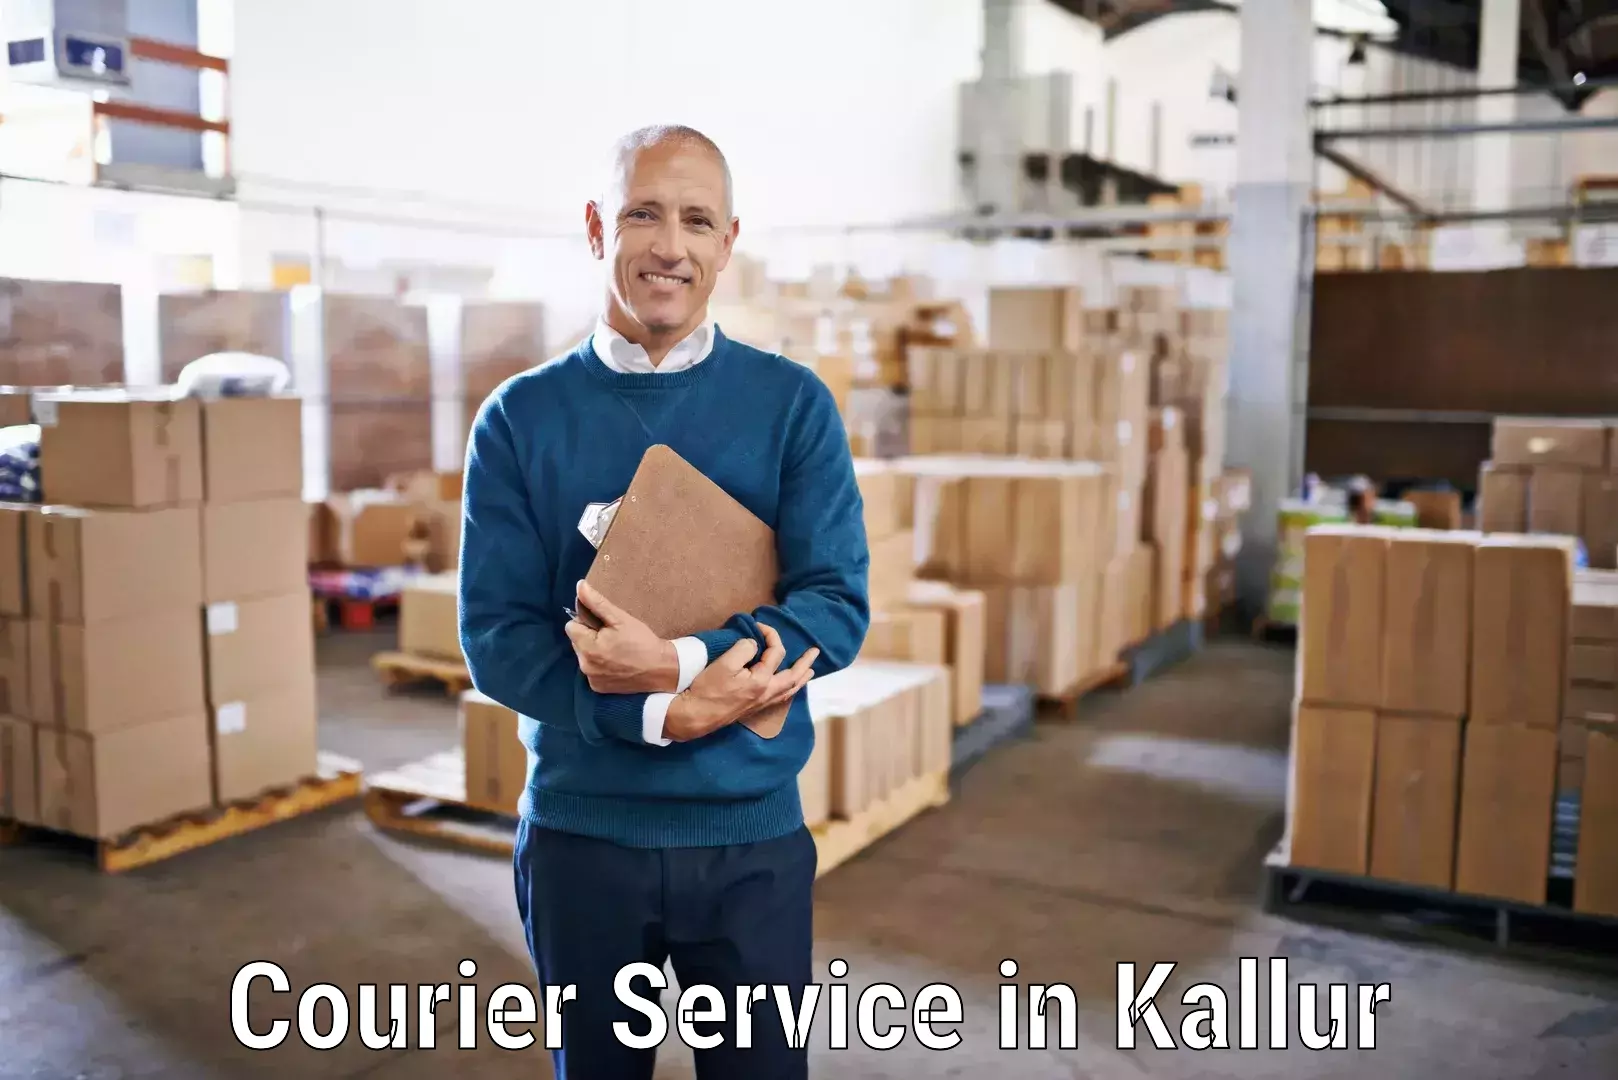 Quality courier services in Kallur